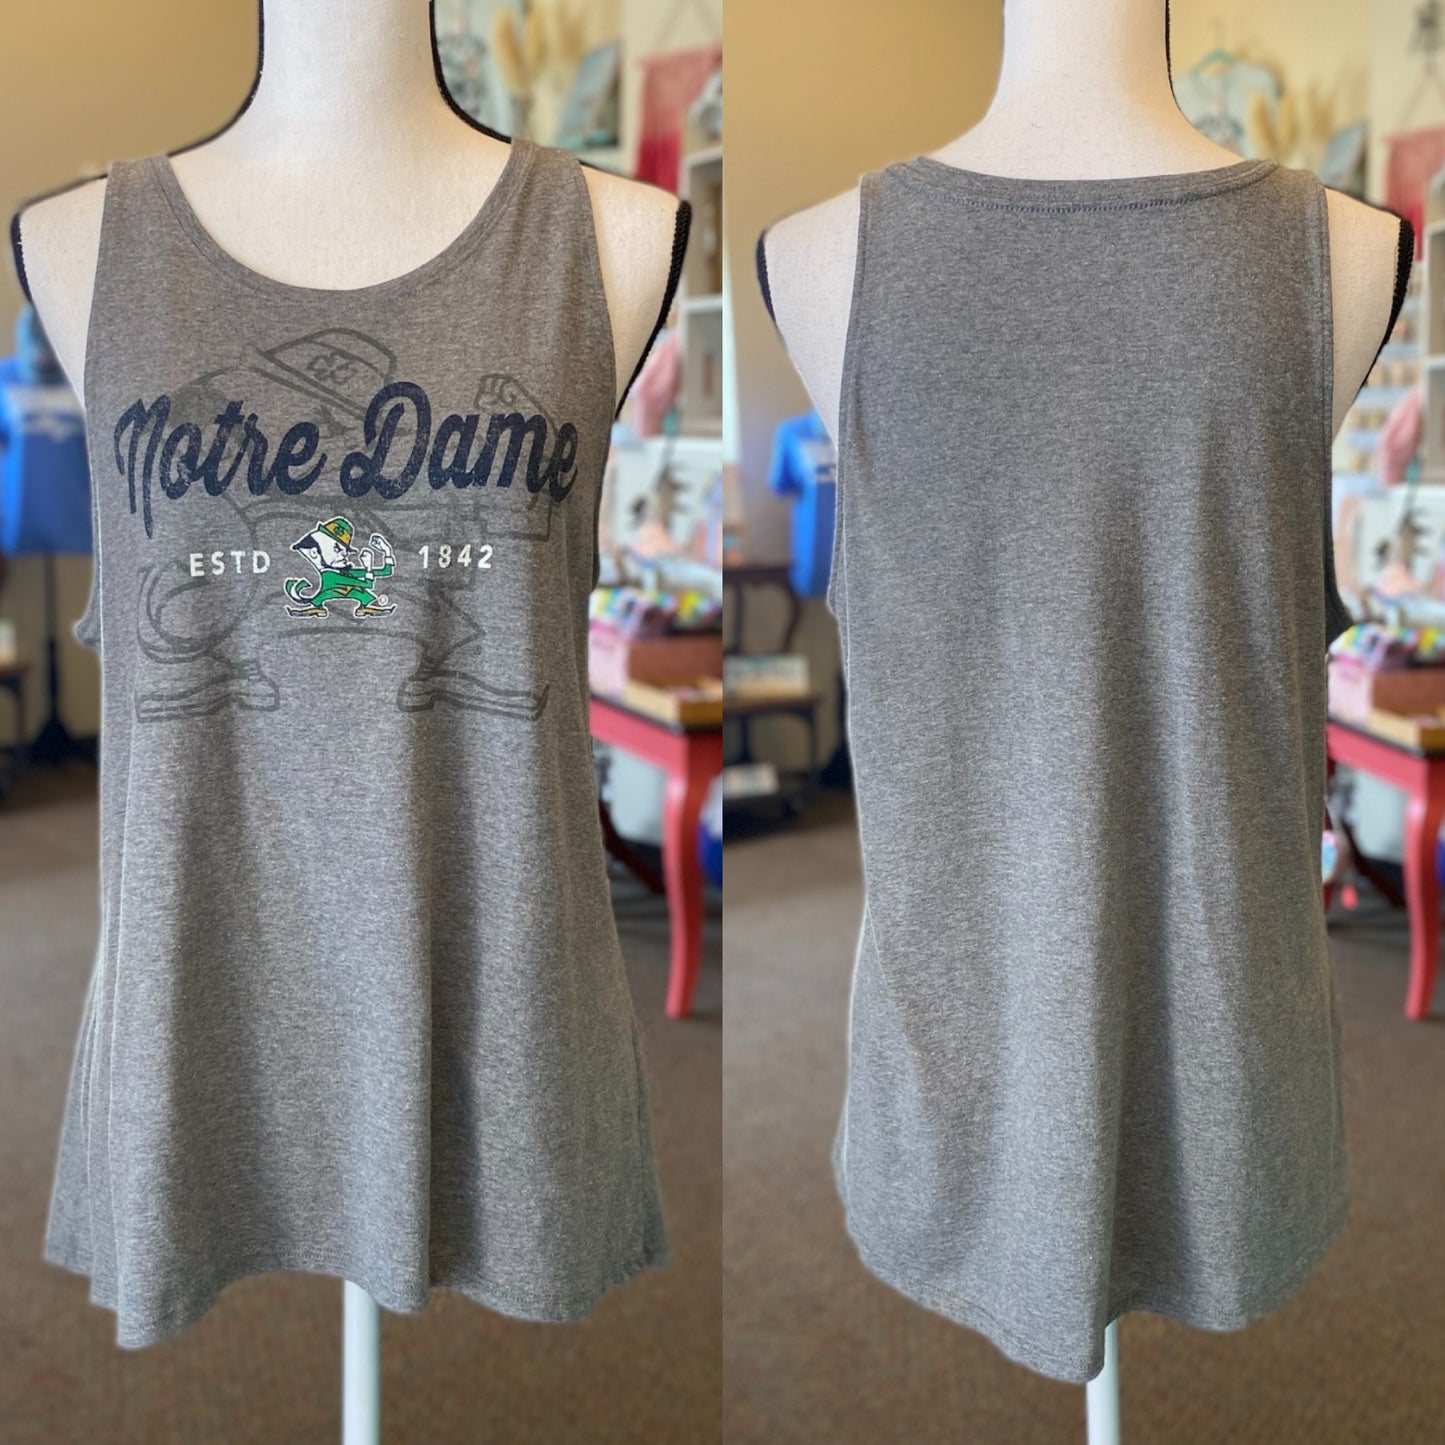 Notre Dame Tank Top - Size Large